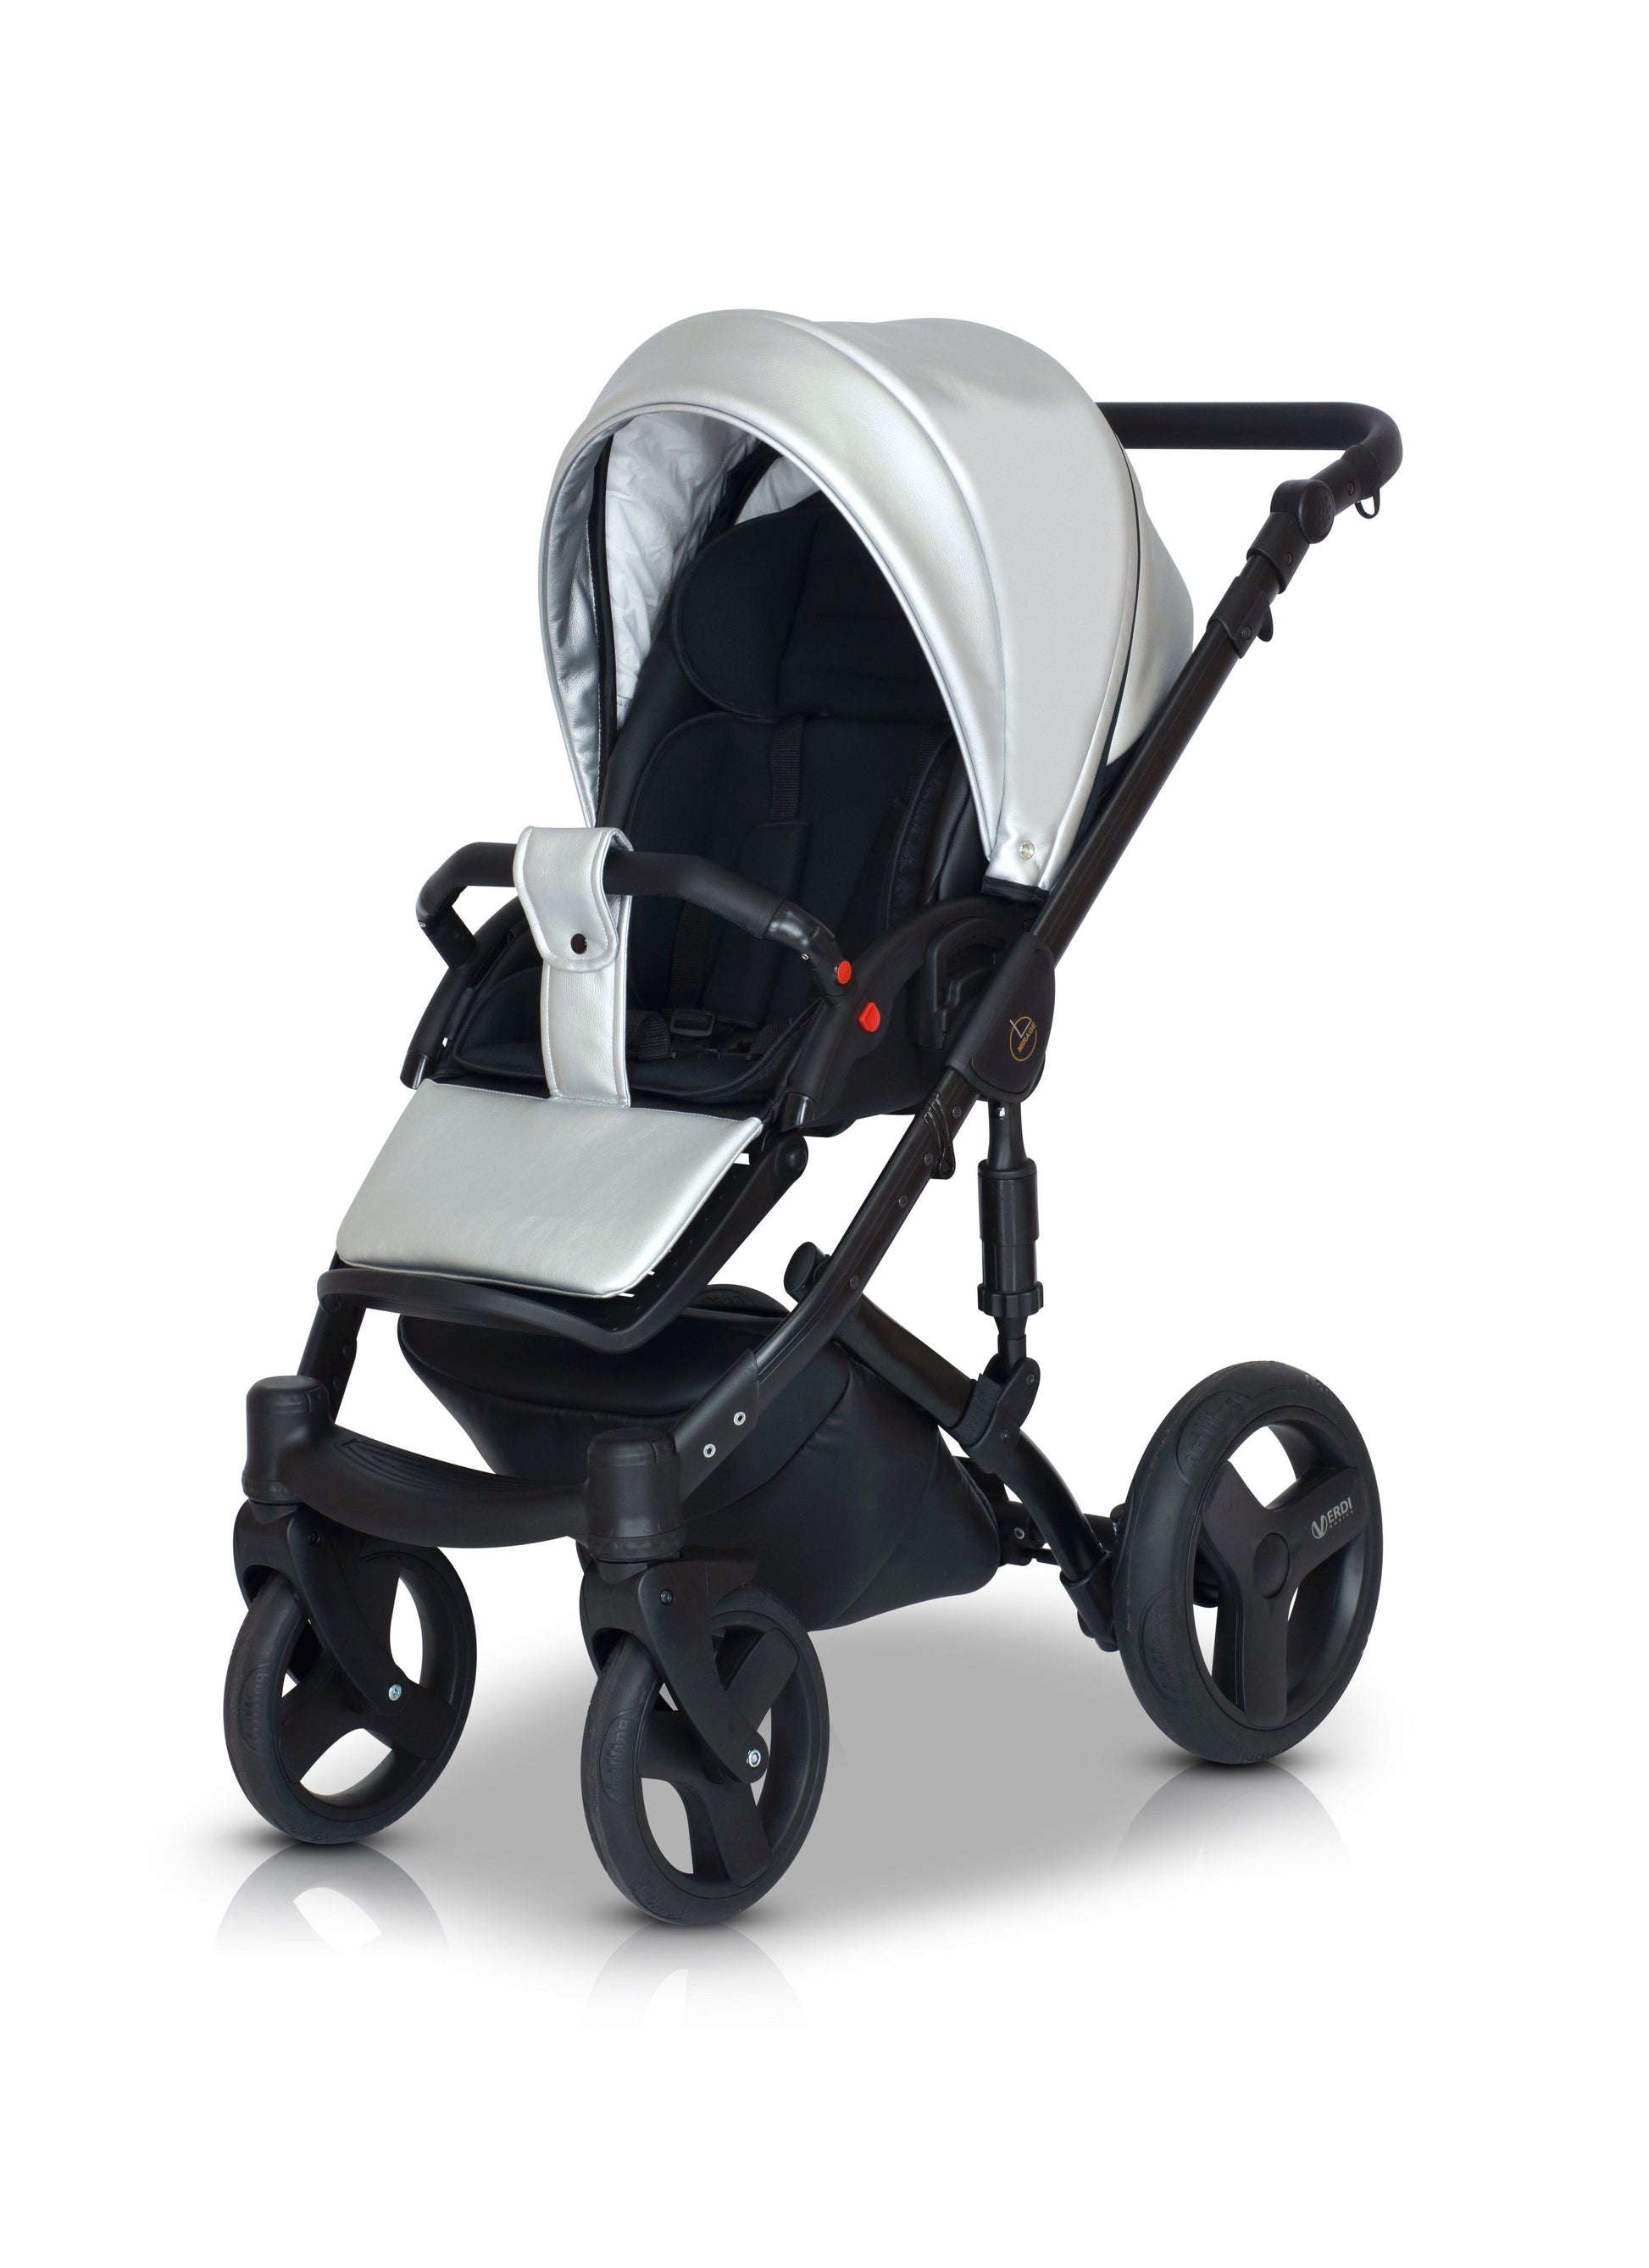 3 in 1 Pushchair in silver | carrycot for newborn baby